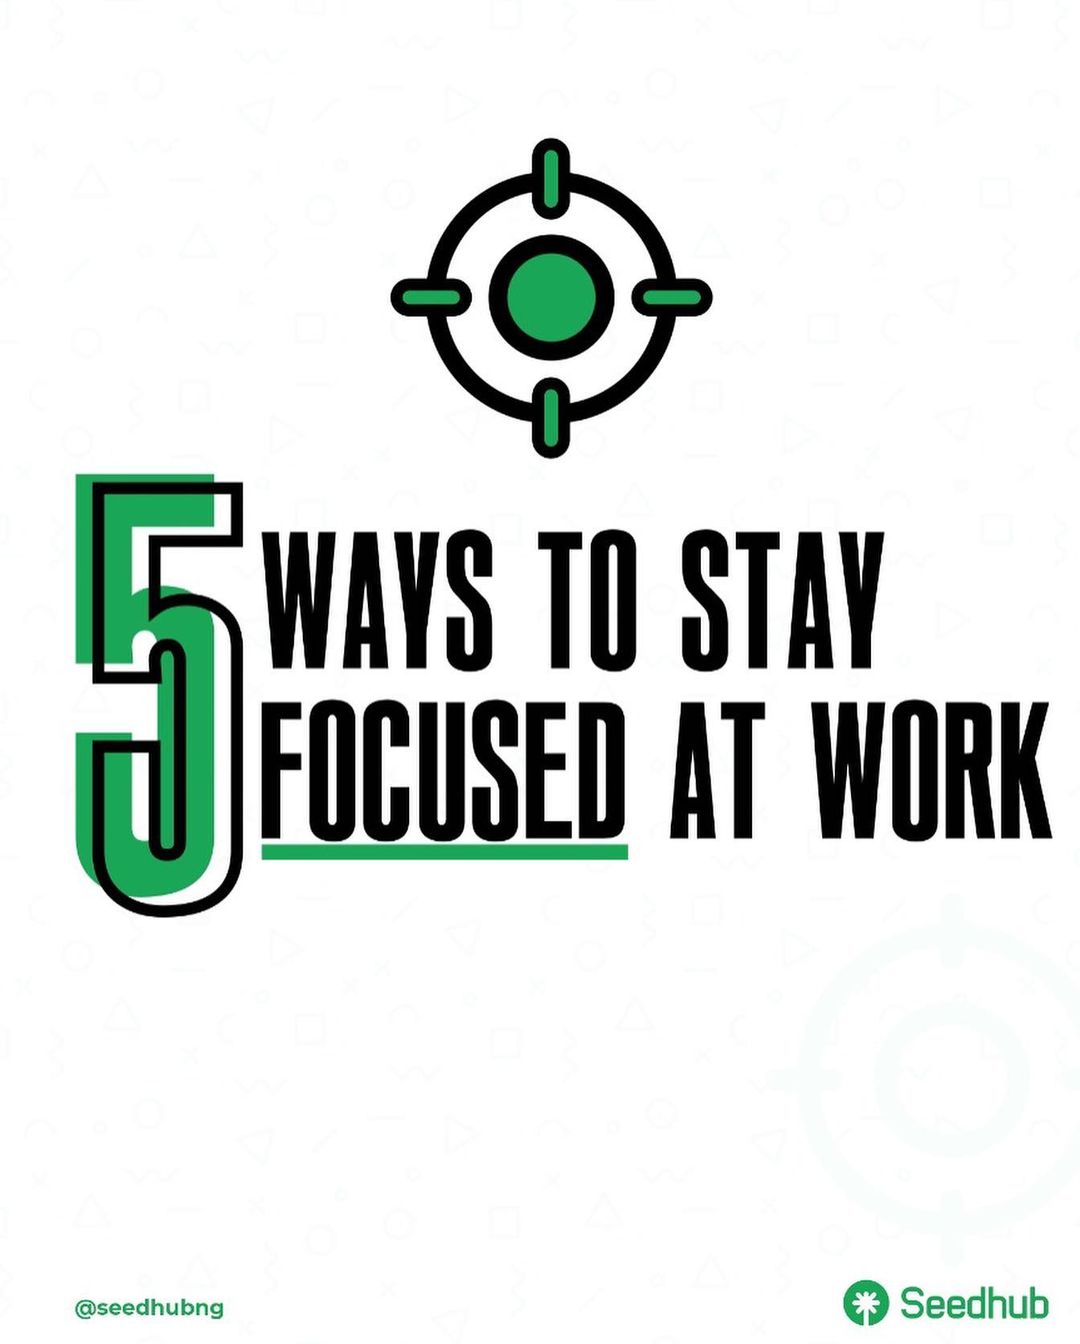 5 WAYS TO STAY FOCUSED AT WORK